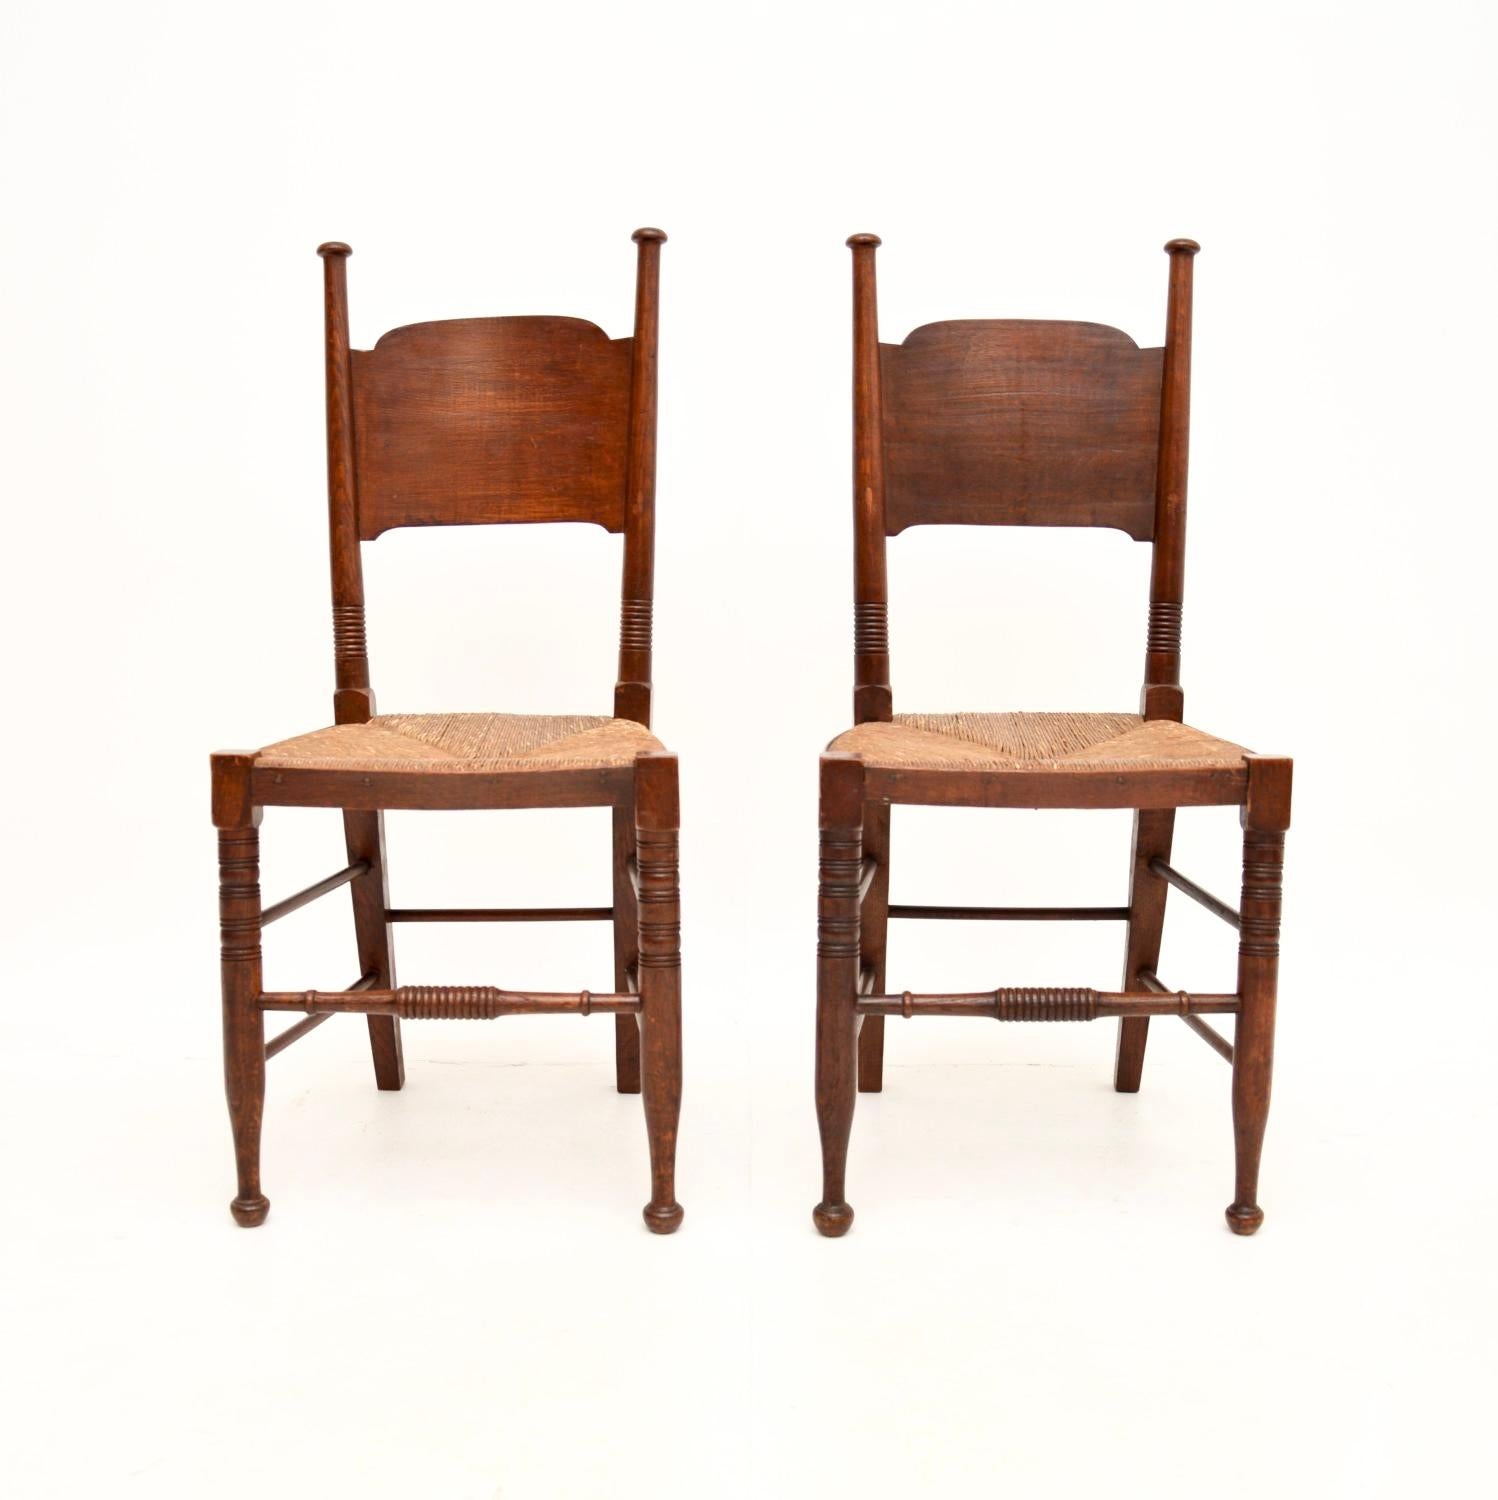 A stunning and iconic pair of antique Arts and Crafts side chairs by William Birch. They were made in England, they date from around the 1890-1900 period.

They are beautifully made and designed, the frames are oak with lovely rushed seats.

The